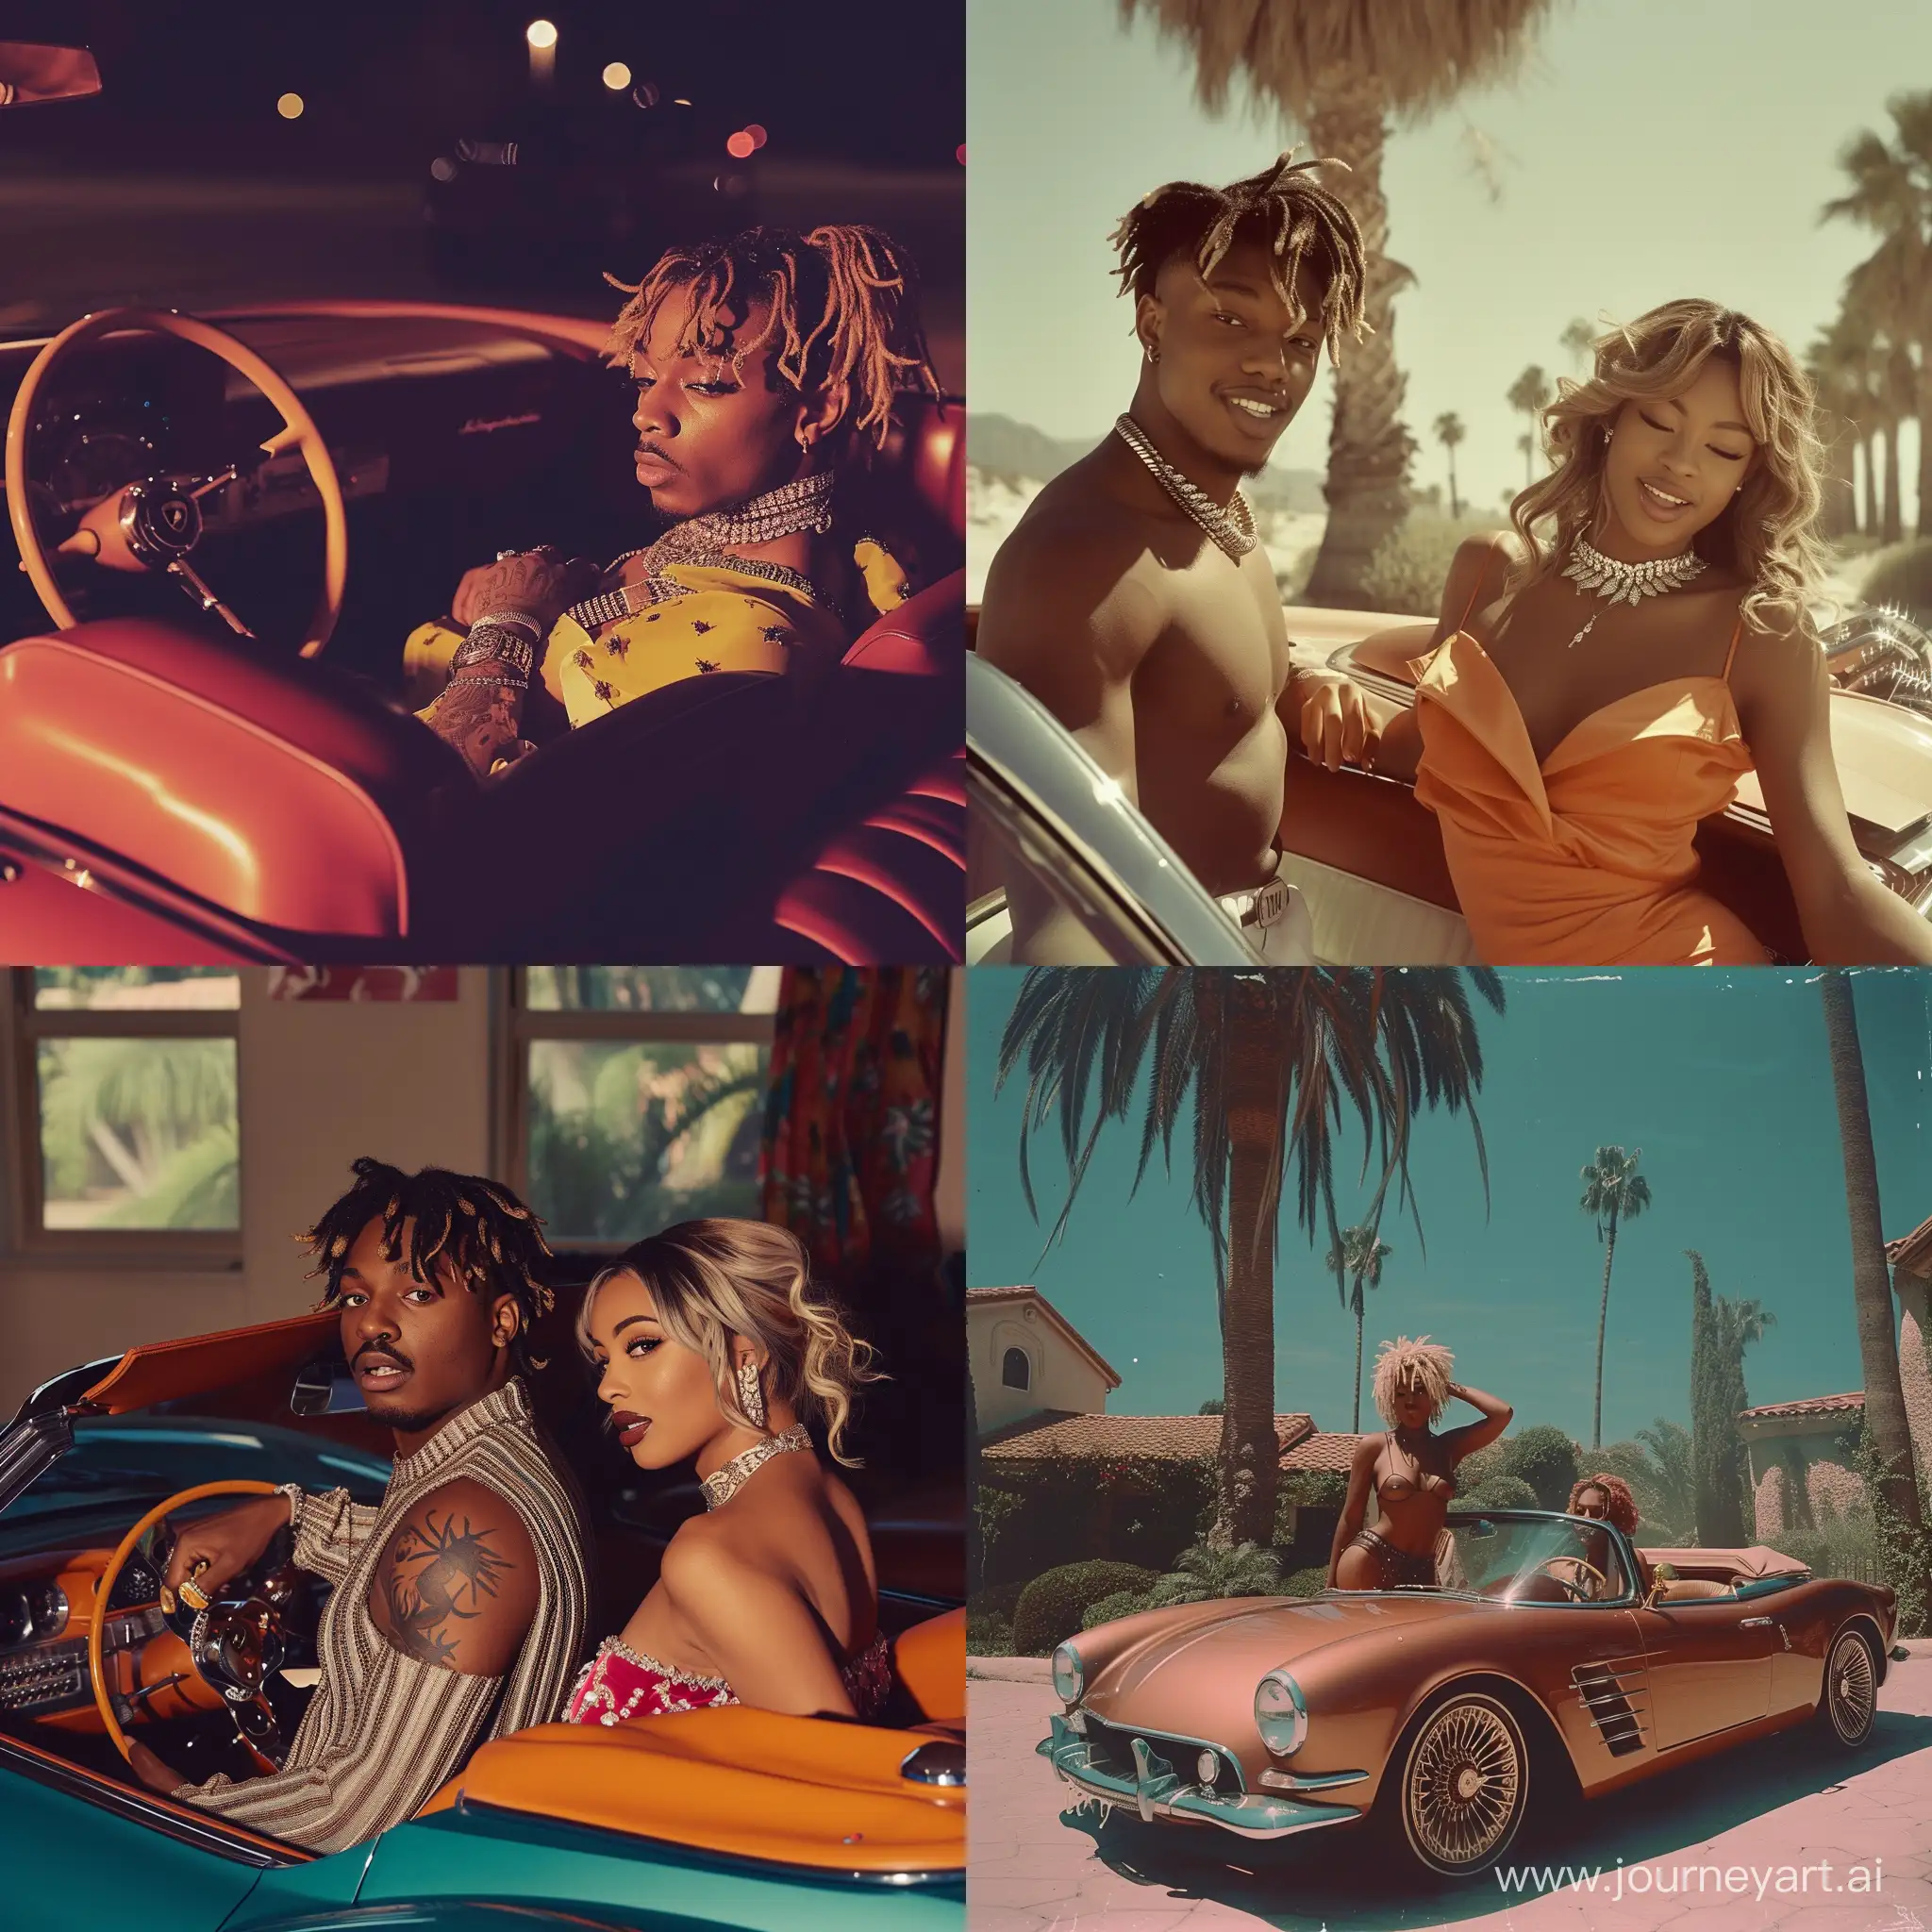 A 1950s Photograph of juice WRLD in a vintage lamborghini.With a Glamorous Woman.